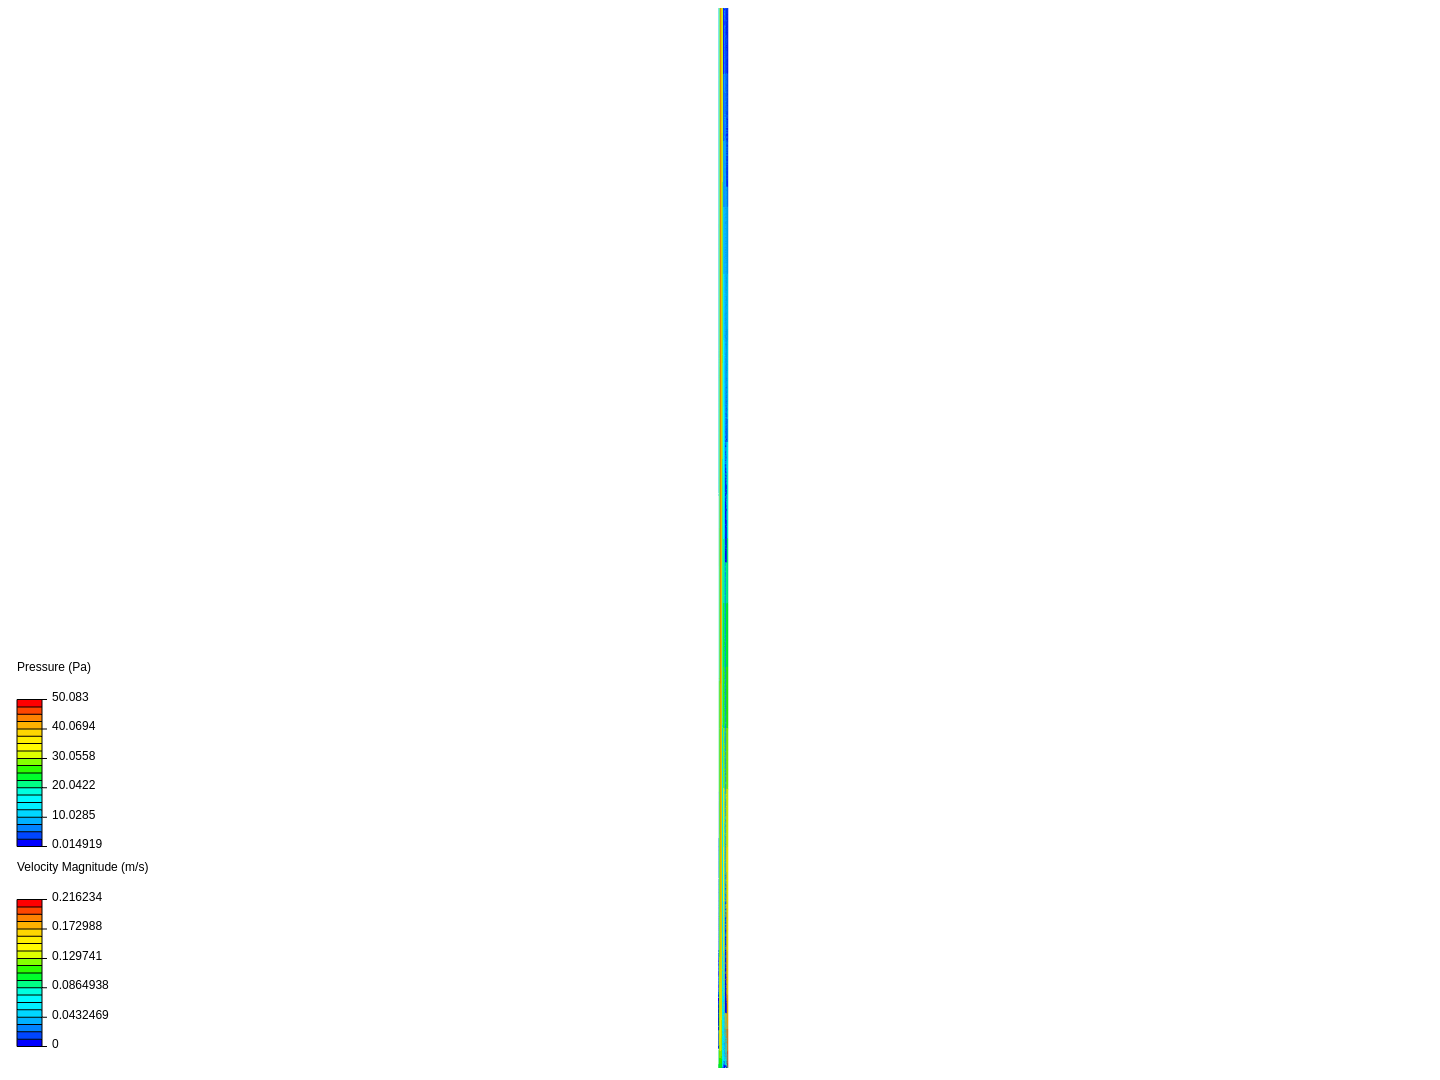 Laminar Flow through Straight Pipe - Poiseuille's Law image